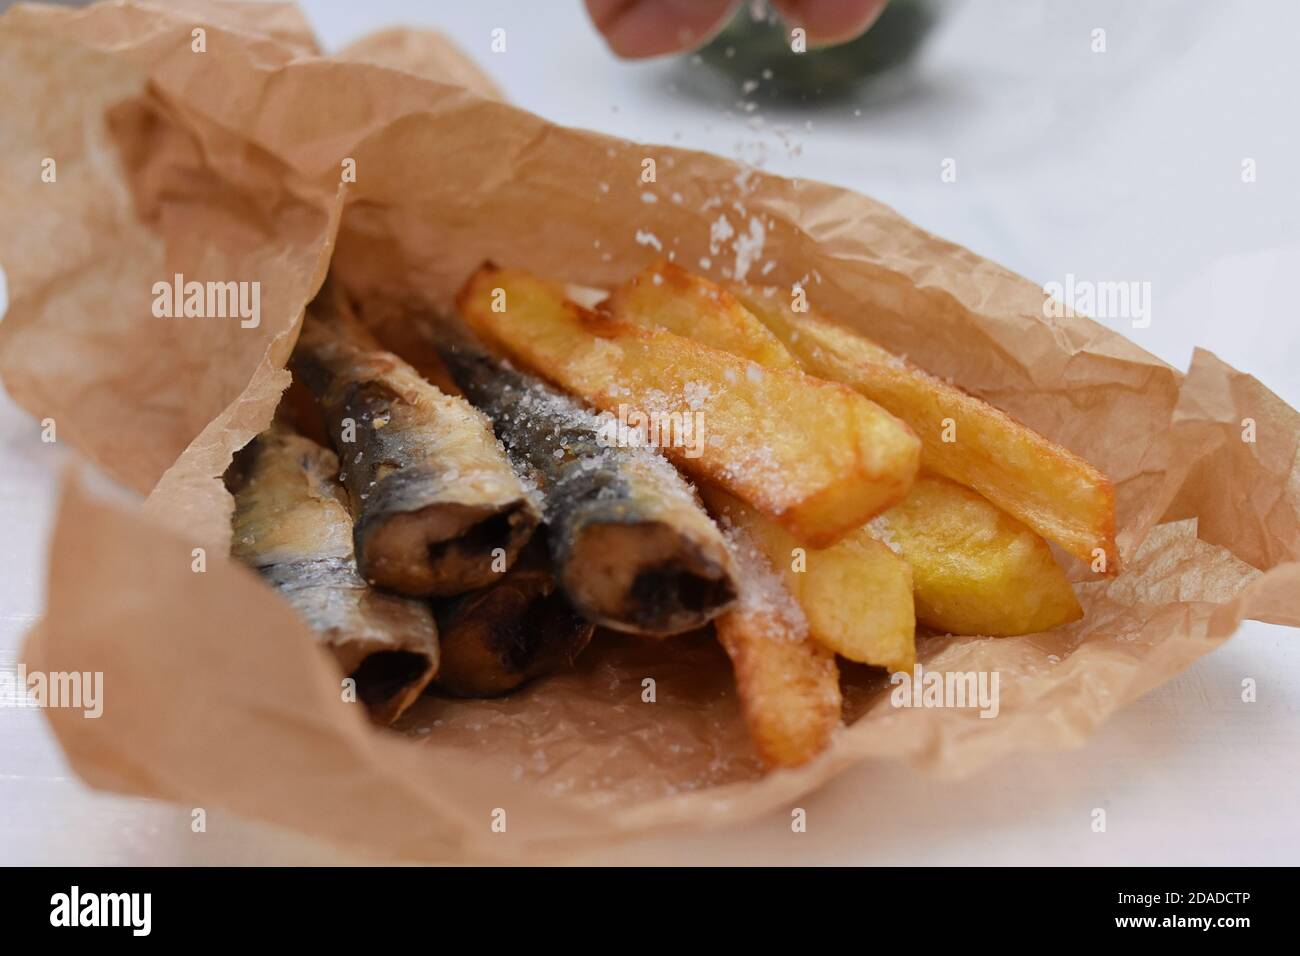 Spreading salt over Fish and chips in a paper wrapper/ Yummy takeaway food Stock Photo